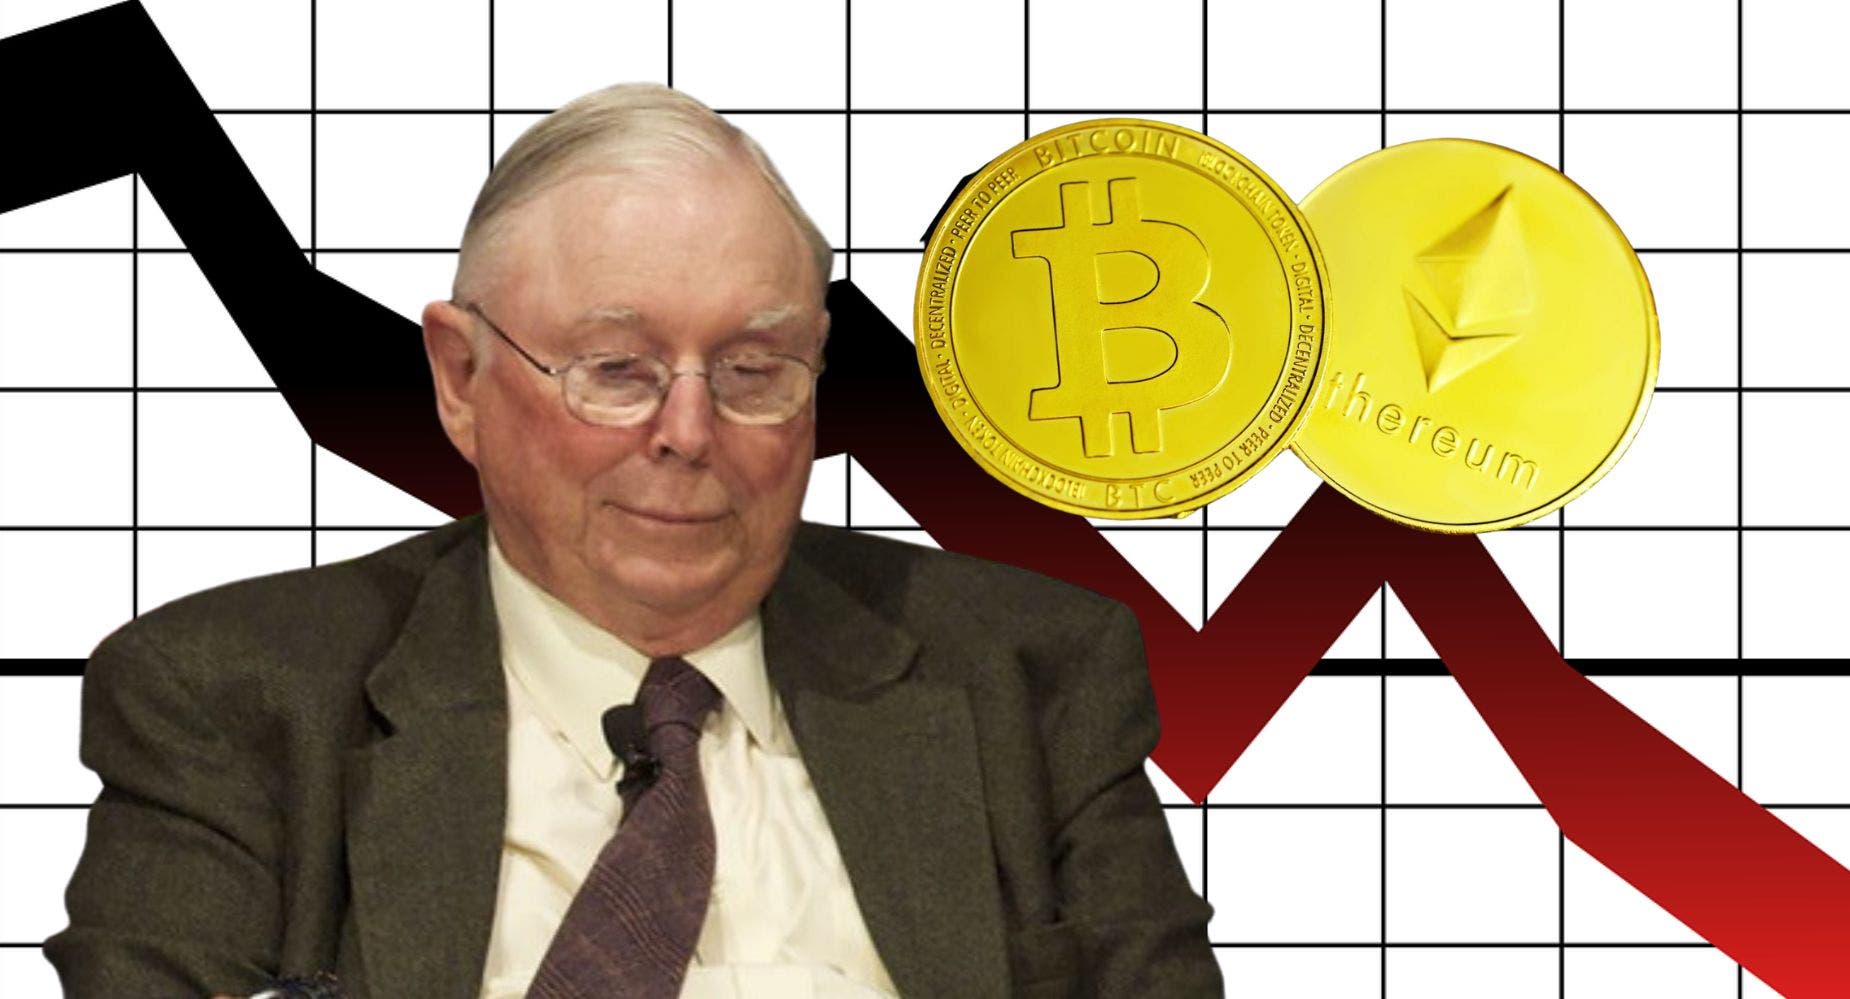 Charlie Munger Says Crypto Is Good For Kidnappers, Bad For Civilization: 'It's Partly Fraud And Partly Delusion'